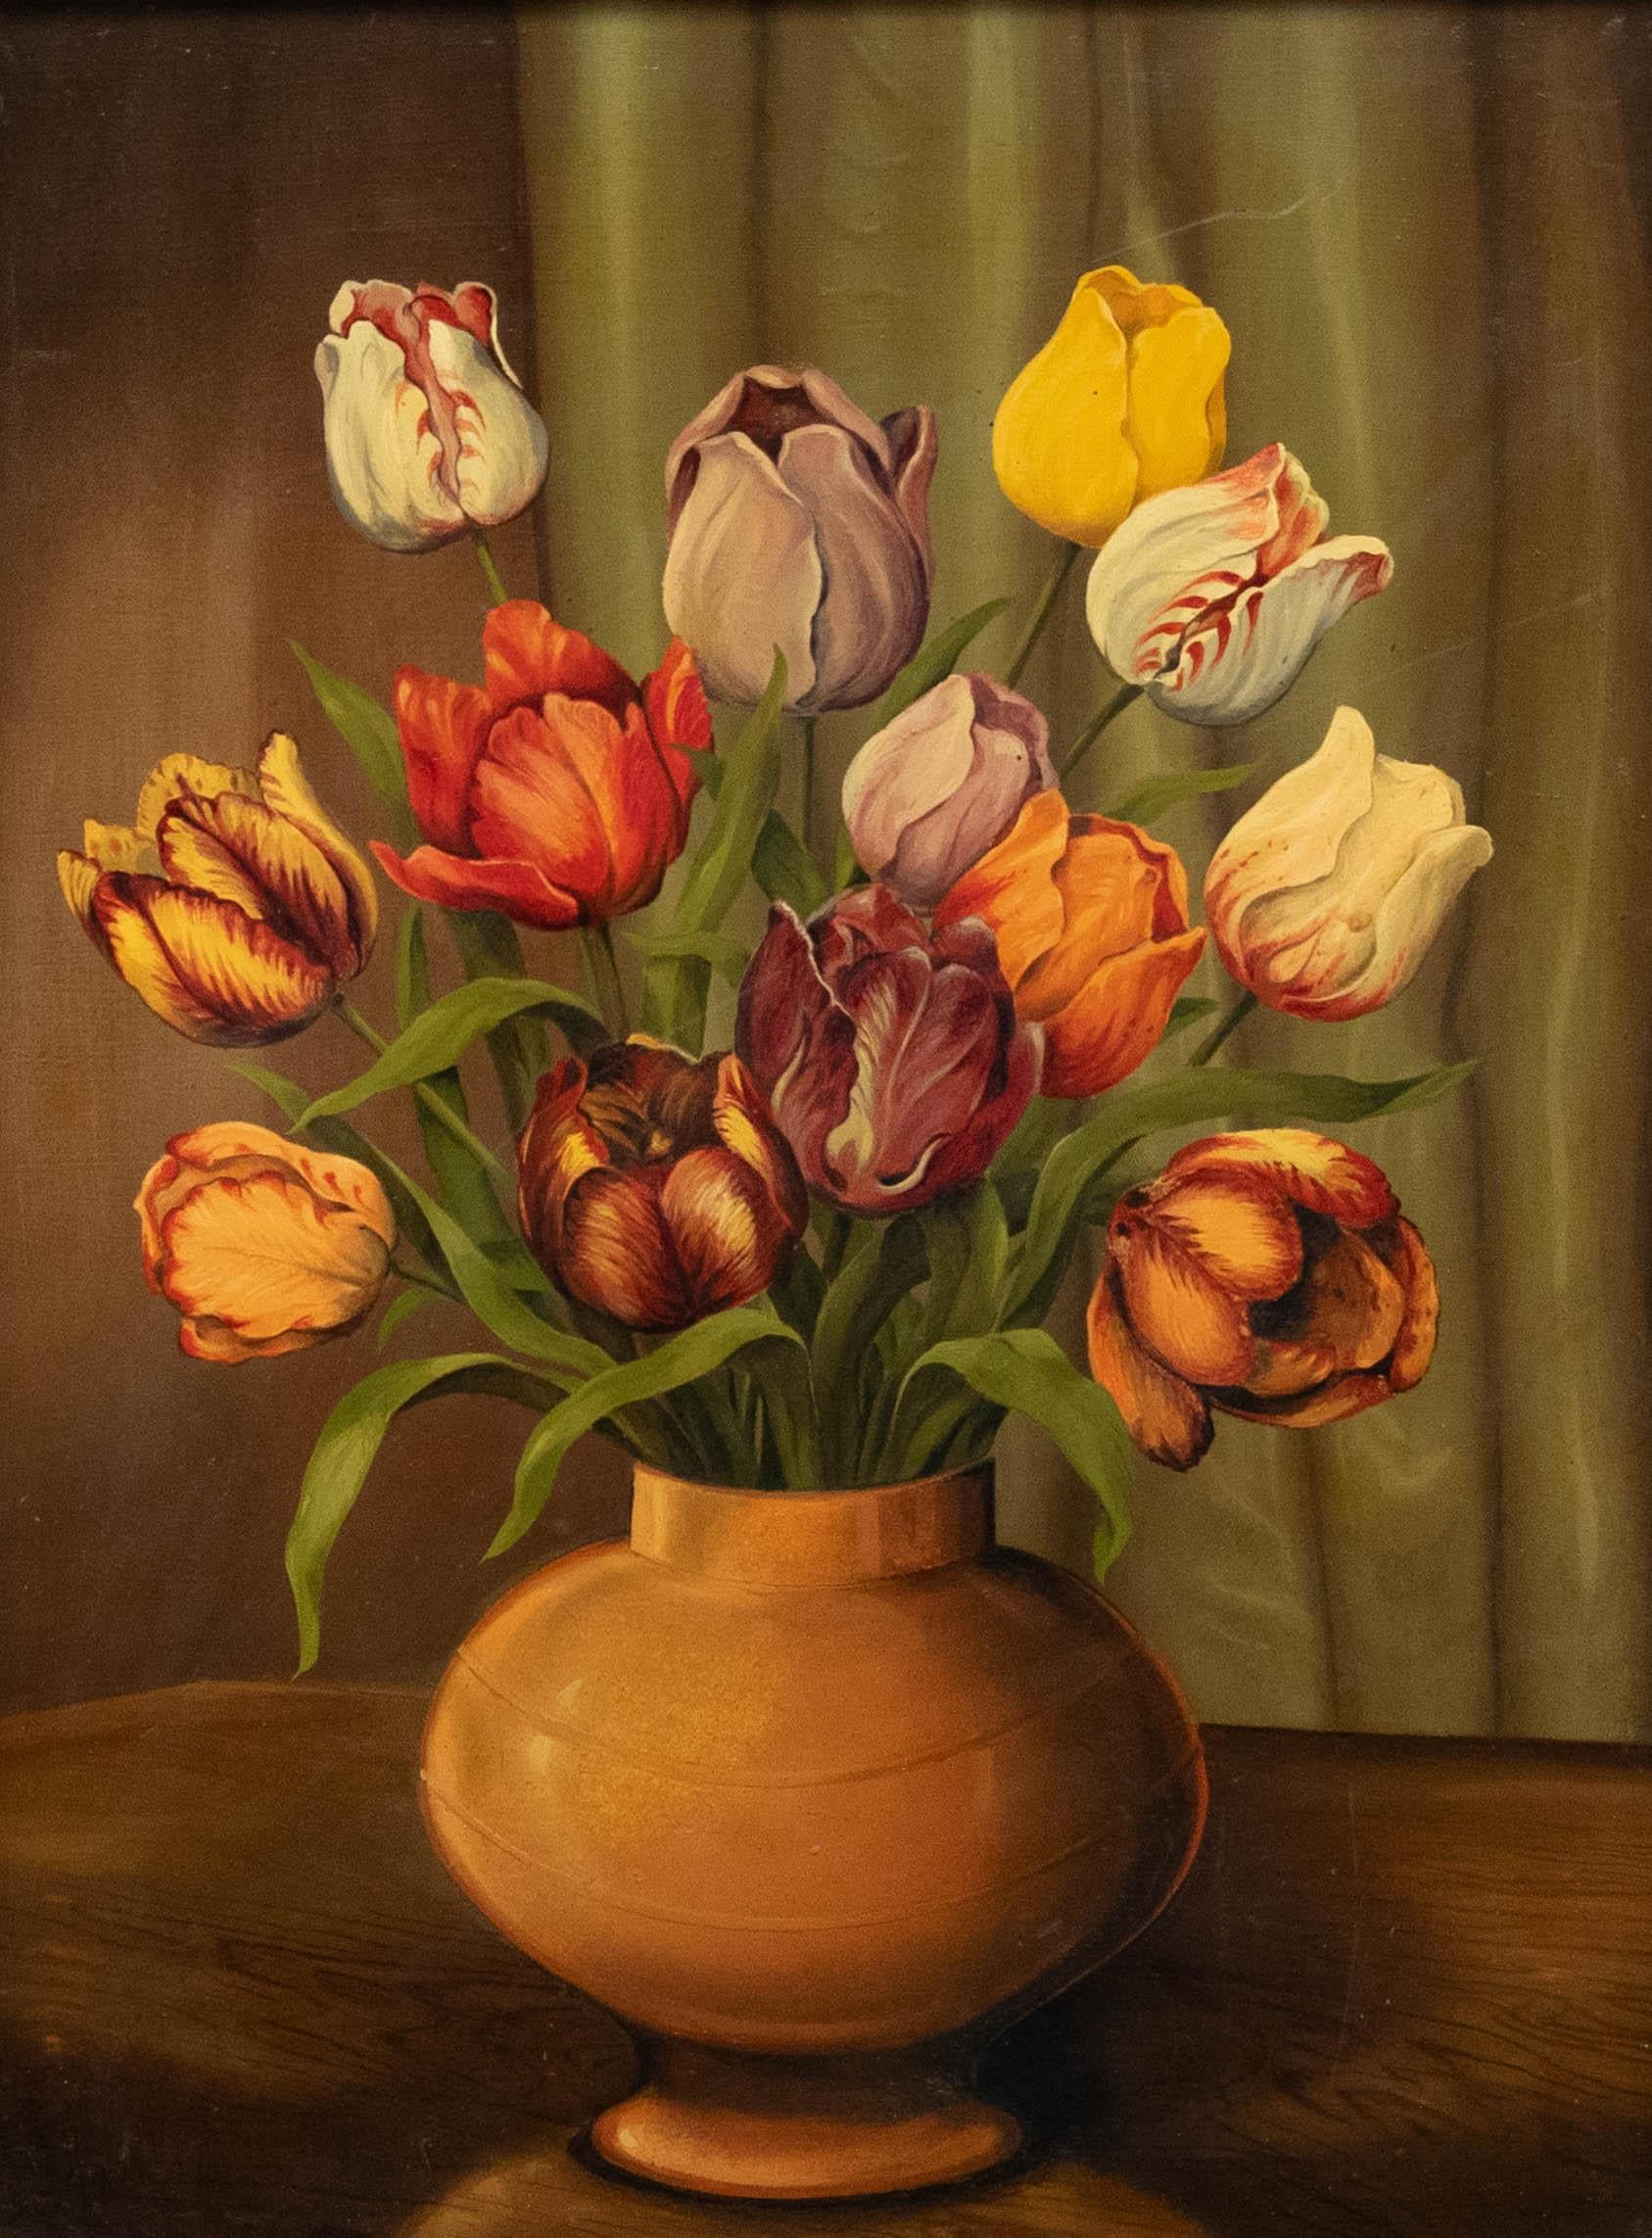 Framed 20th Century Oil - Still Life of Tulips - Painting by Unknown